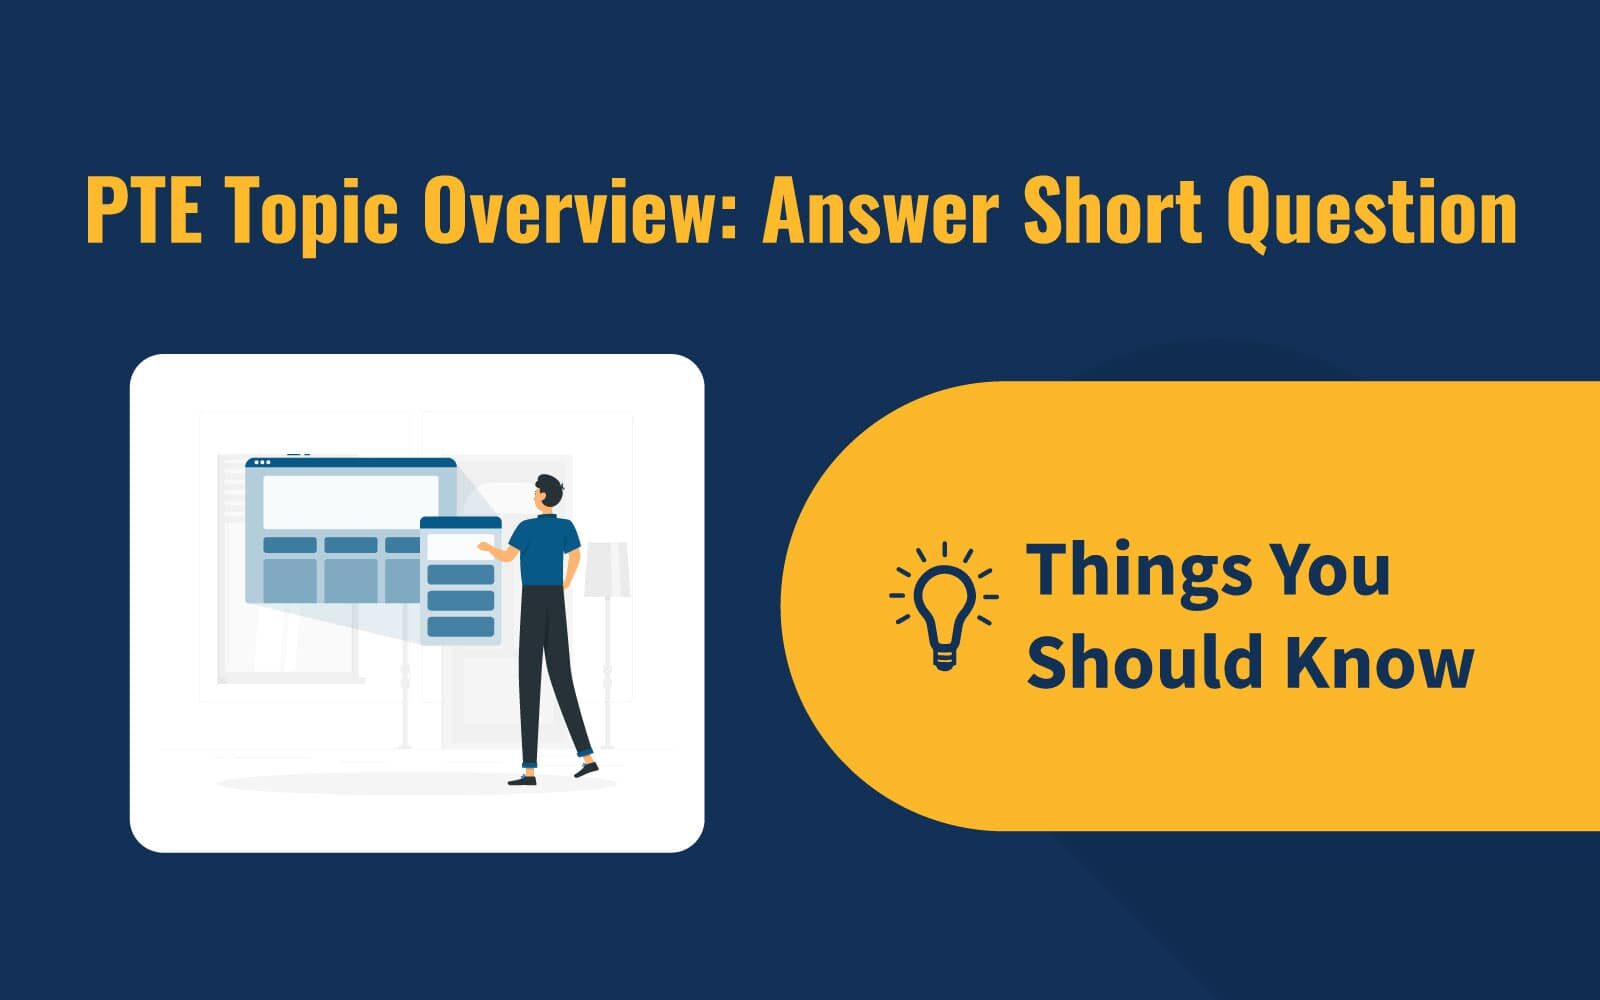 PTE Topic Overview: Answer Short Question